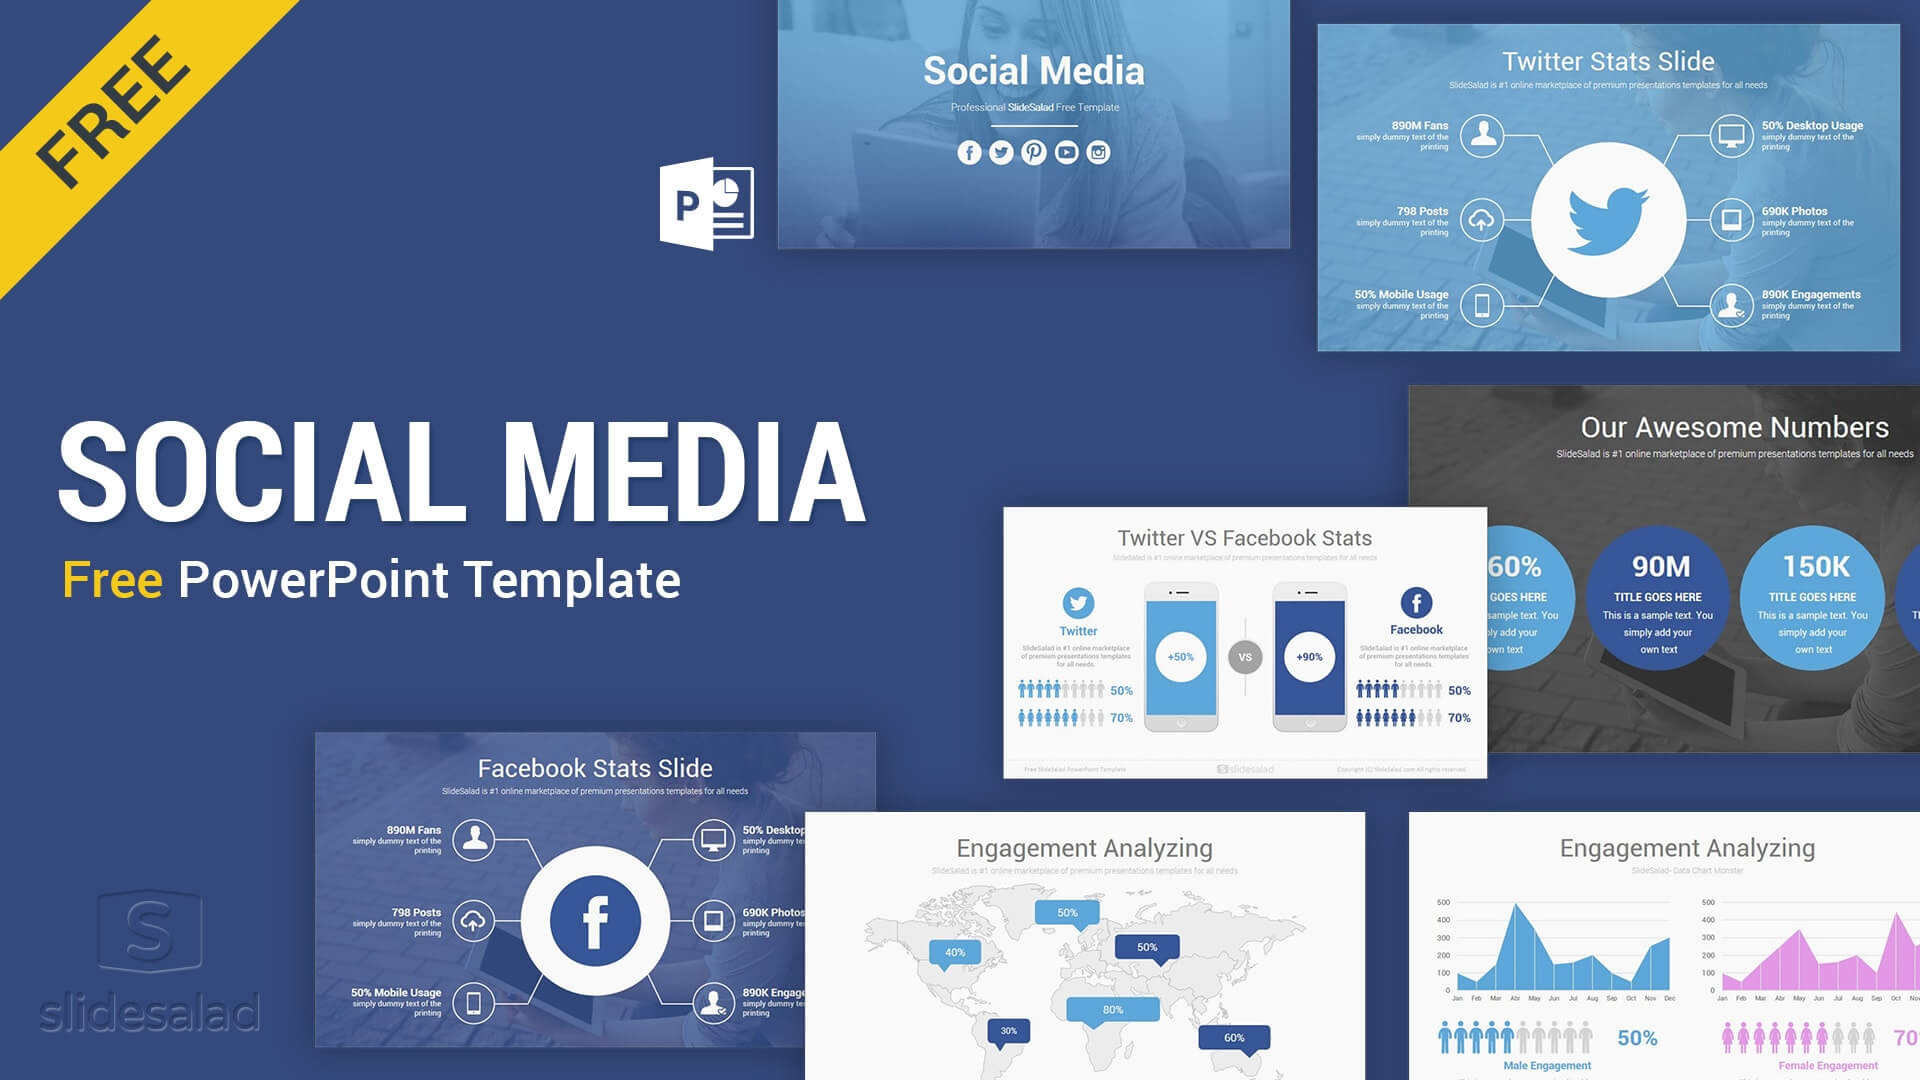 Social Media Free Powerpoint Template Ppt Slides – Slidesalad With Biography Powerpoint Template